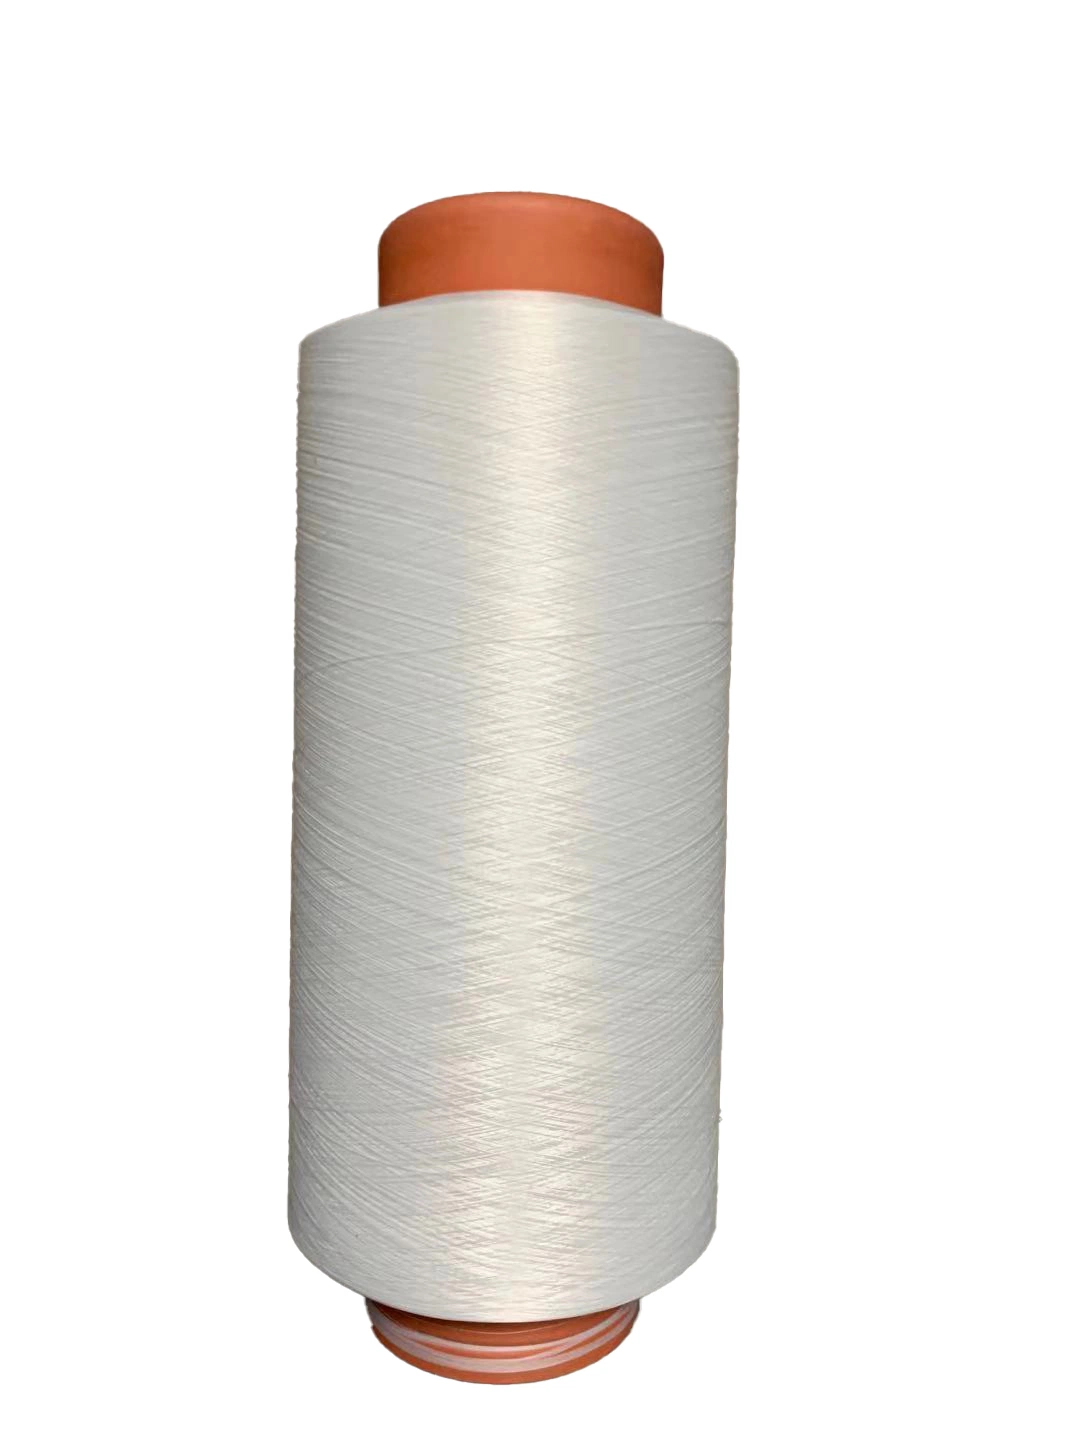 DTY 300/72 100% Dope Dyed Color Polyester Yarn